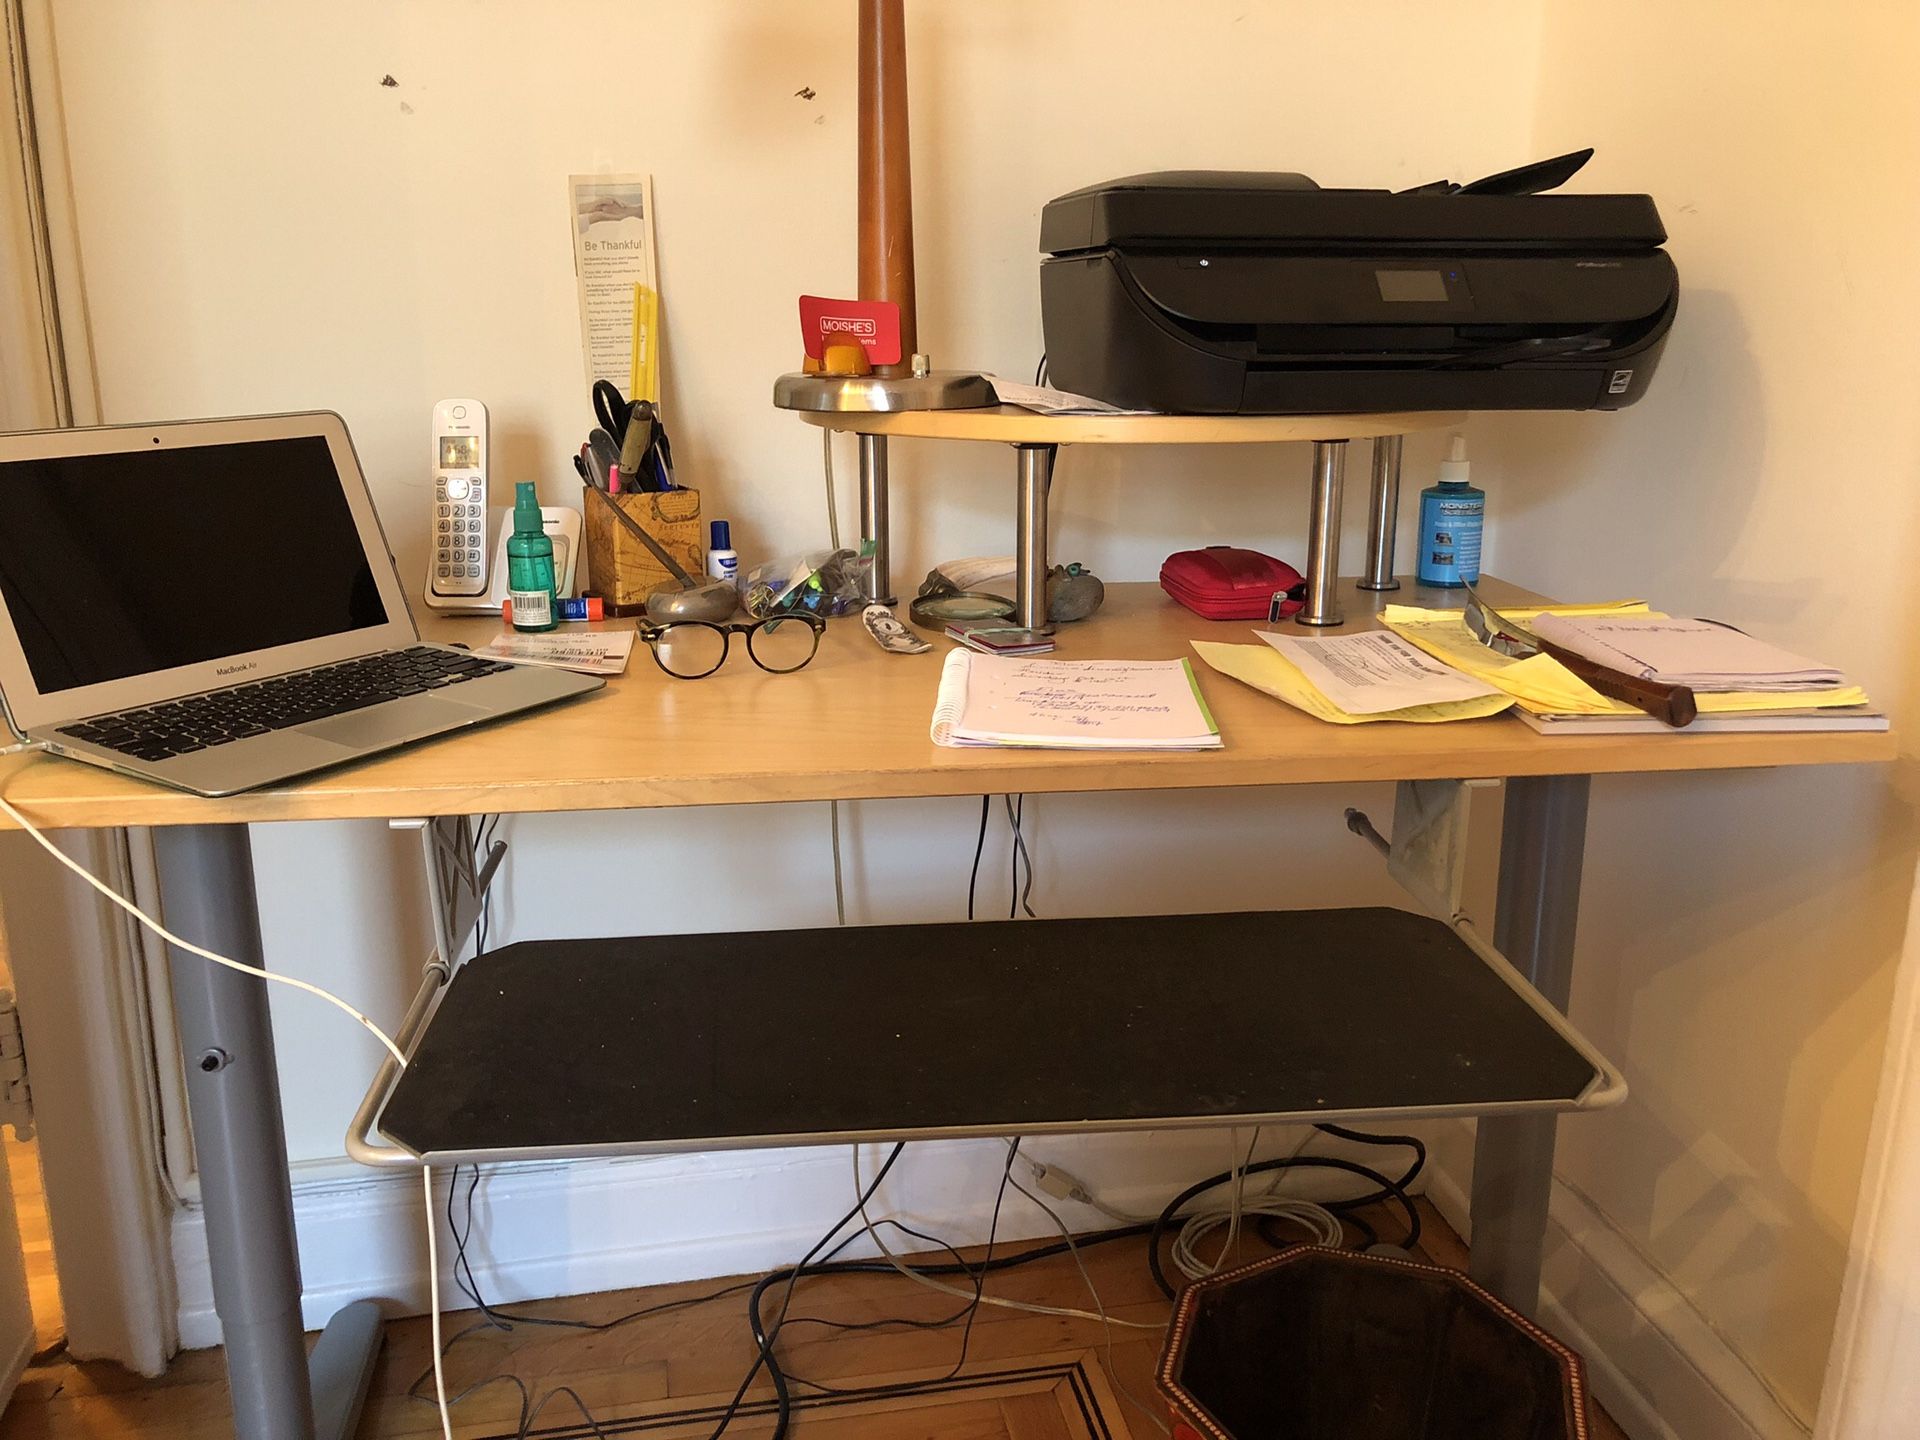 IKEA desk with keyboard drawer and stand for printer (or whatever)